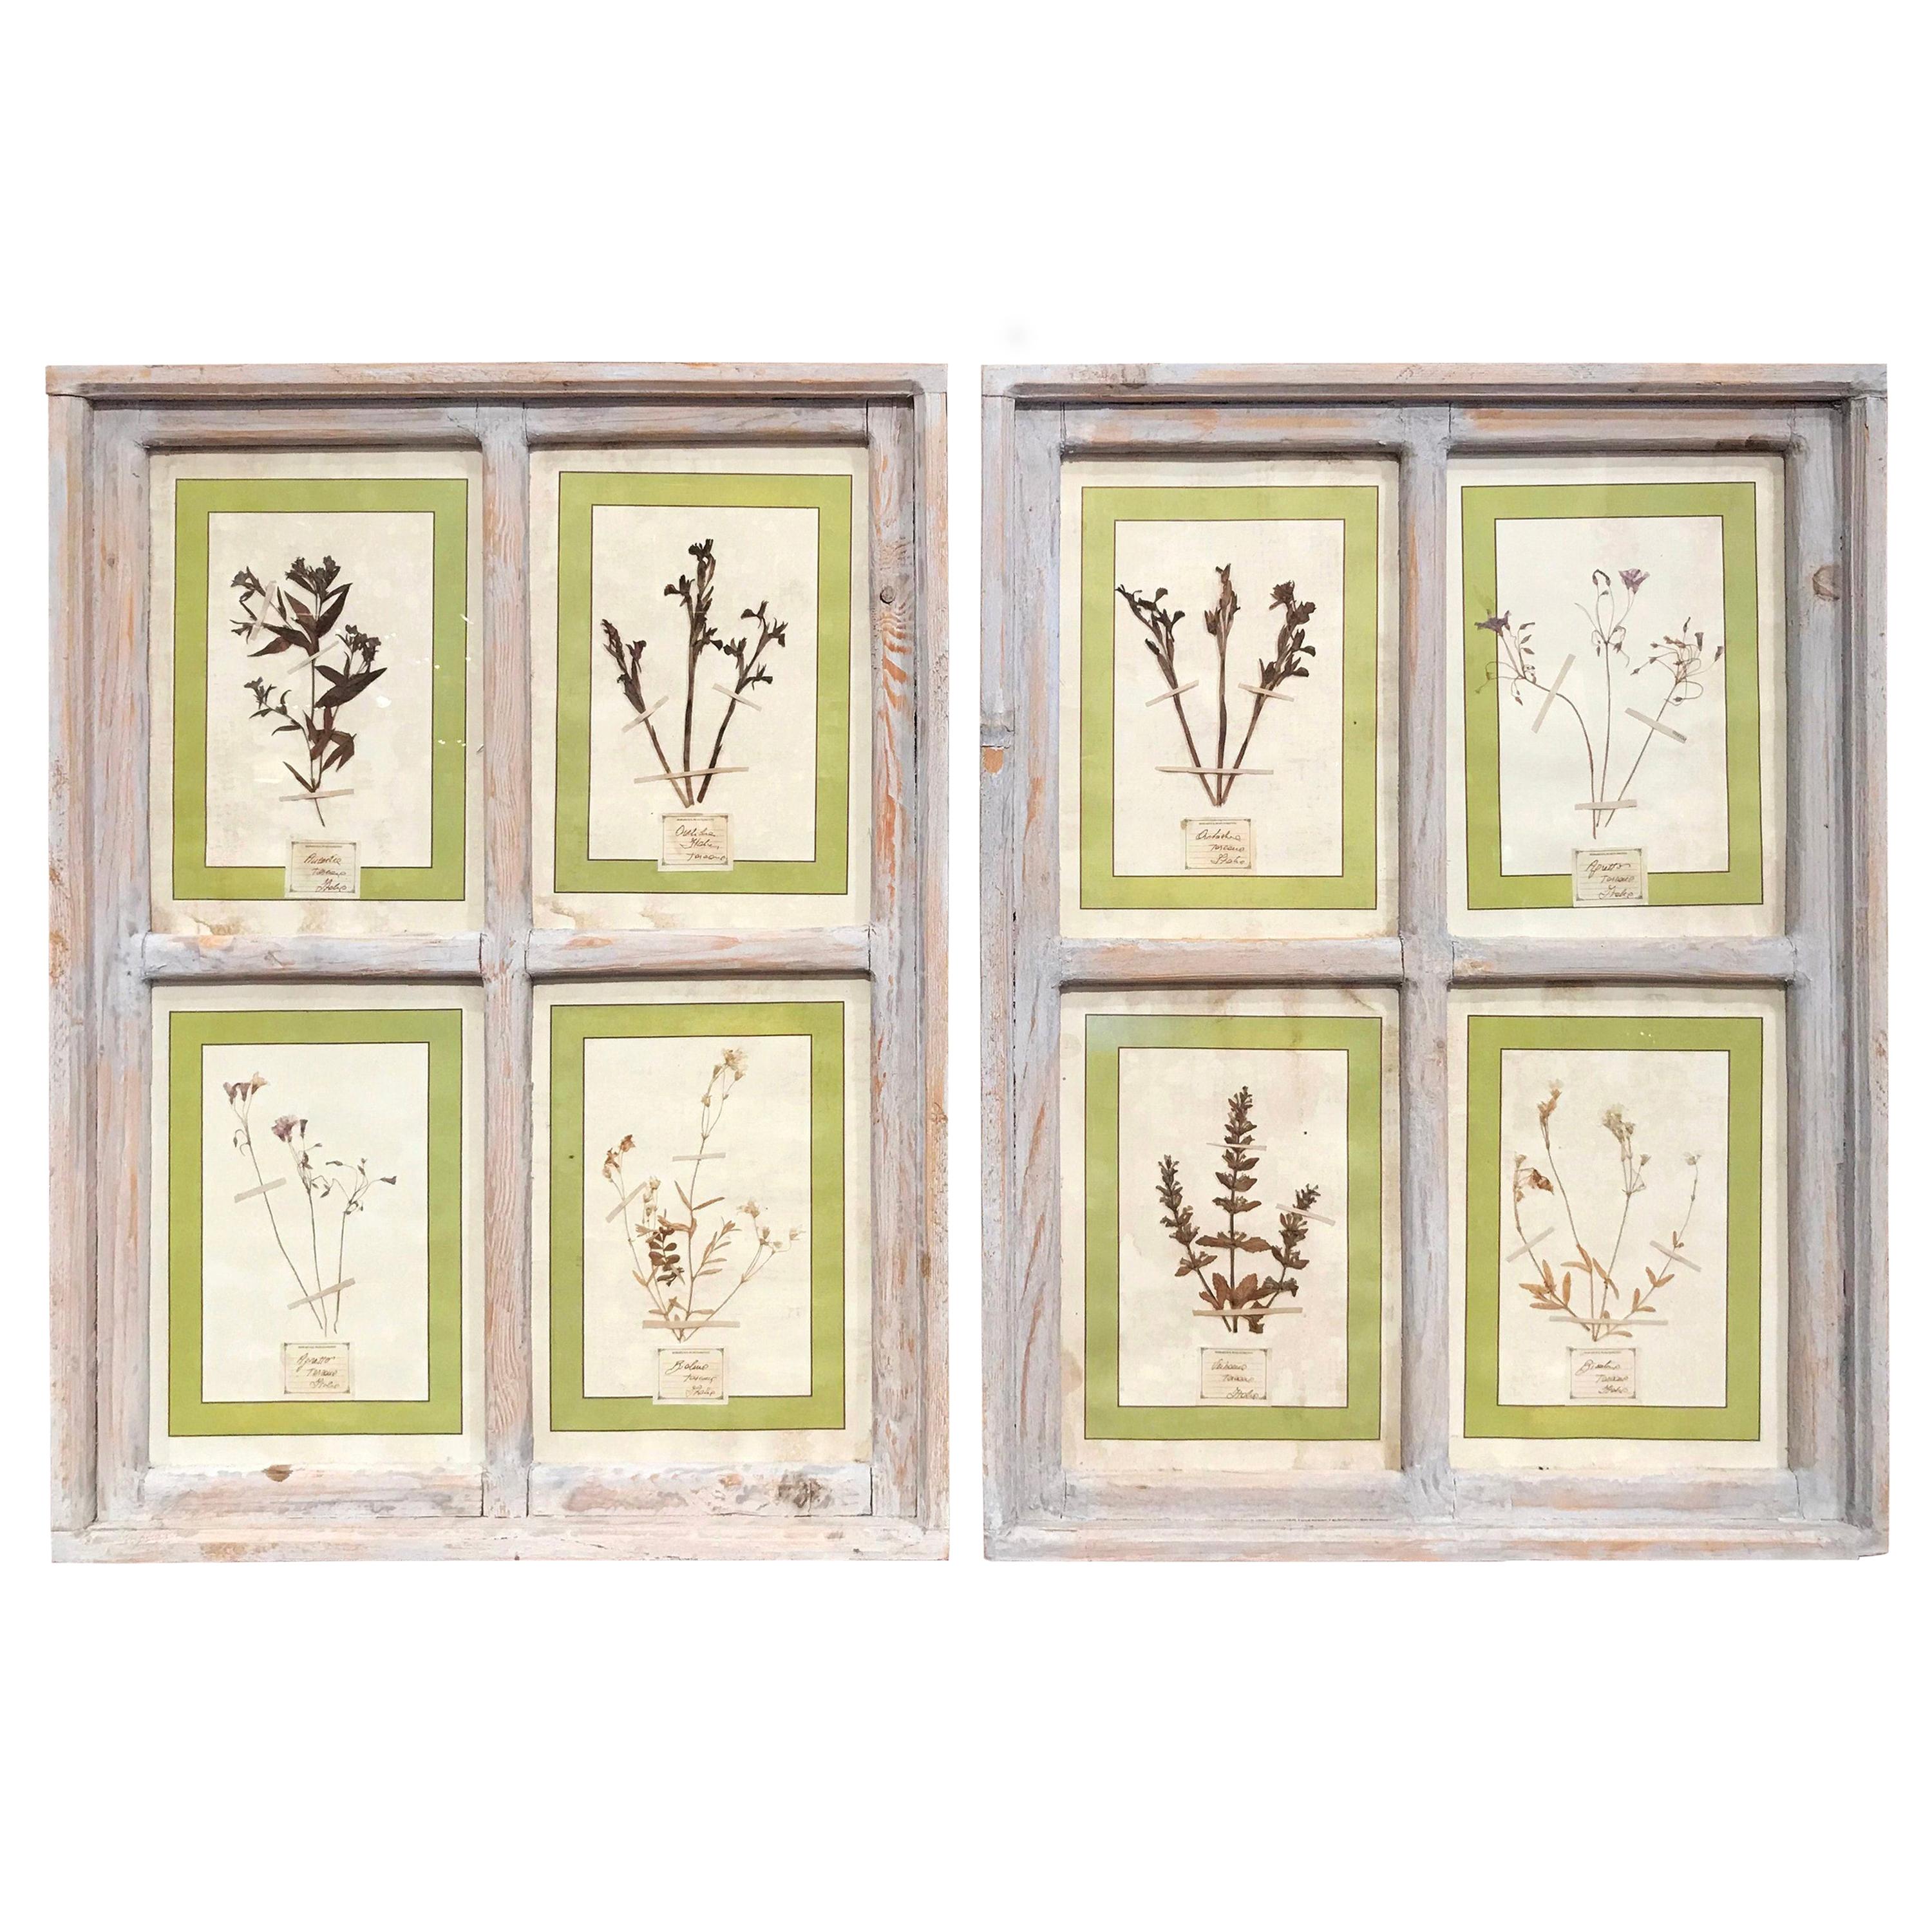 Pair of 21st Century Italian Dried Botanical Flowers in Painted Frames